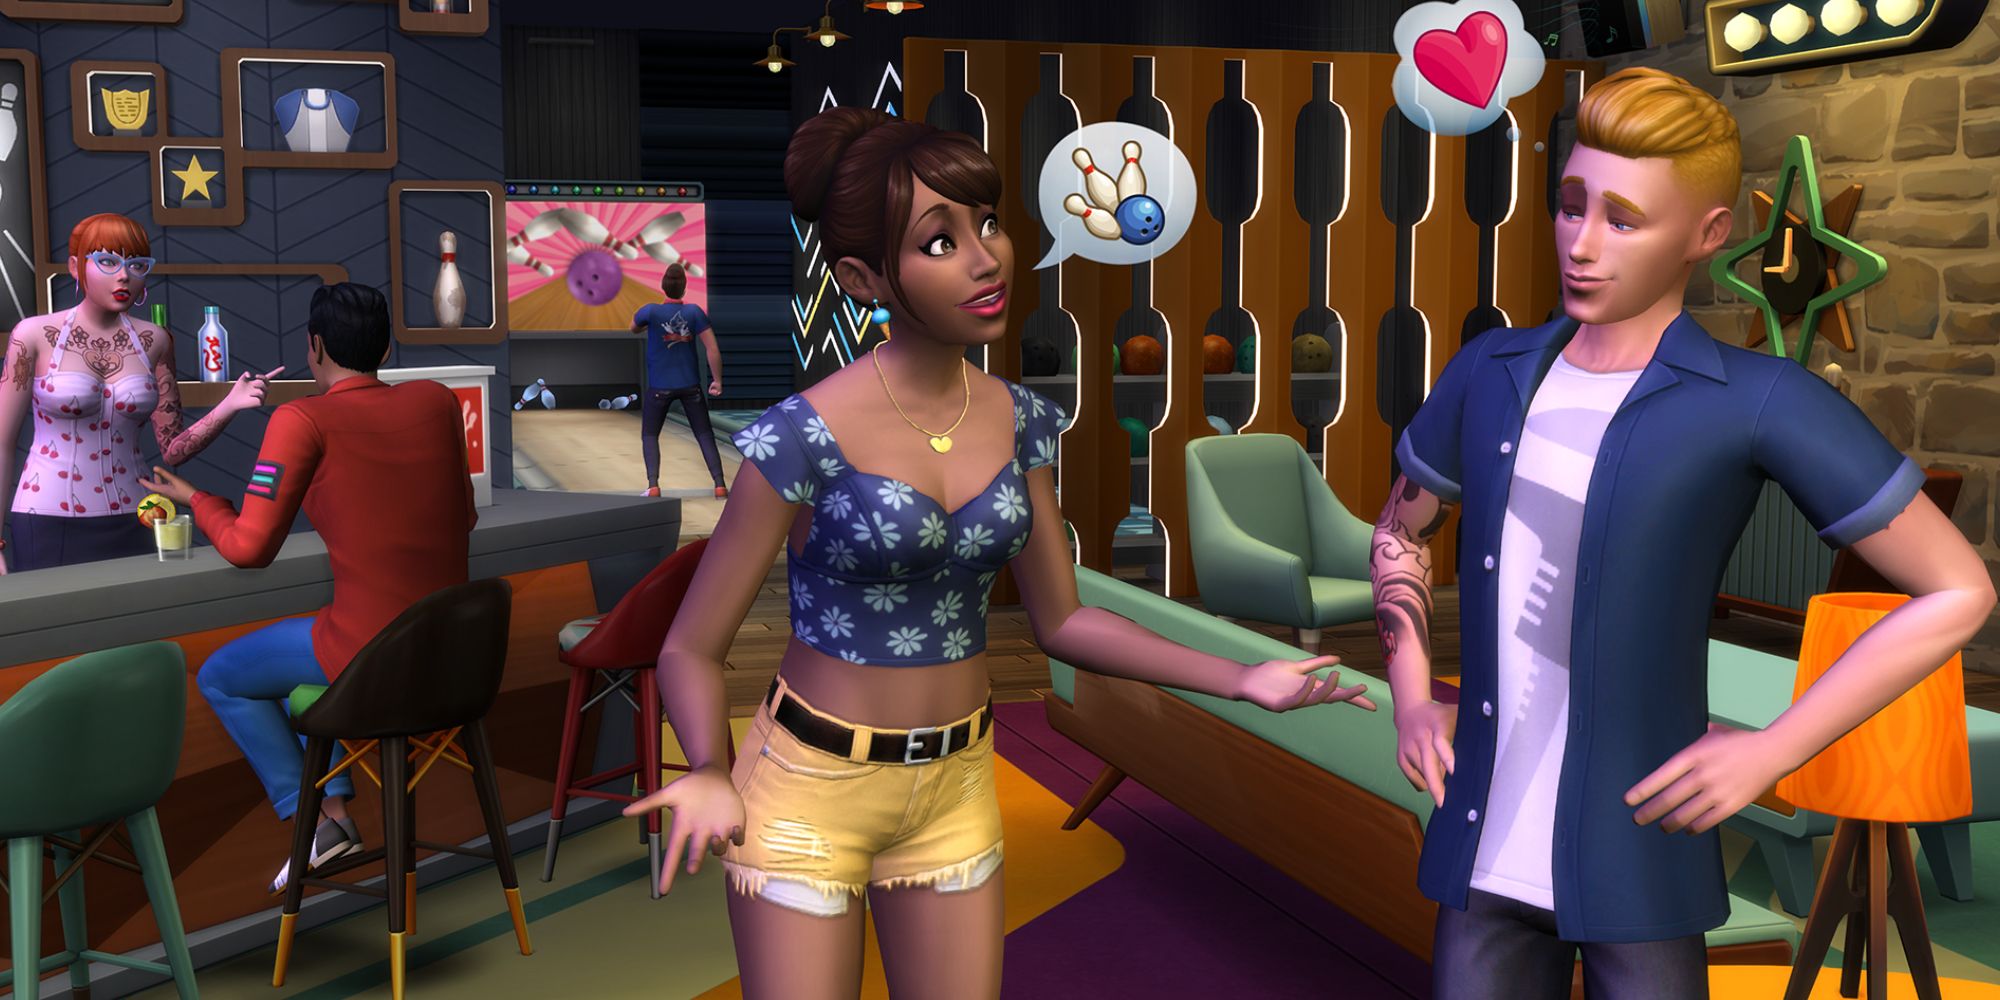 Sims 4 sims in a bowling alley chatting about the sport